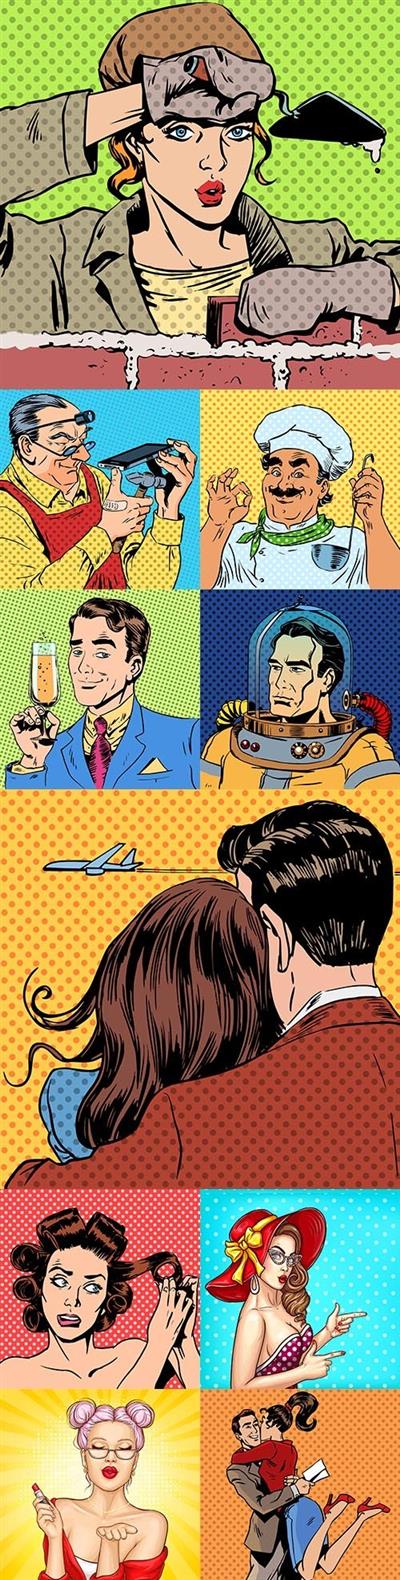 Man and woman comic illustrations in pop art style